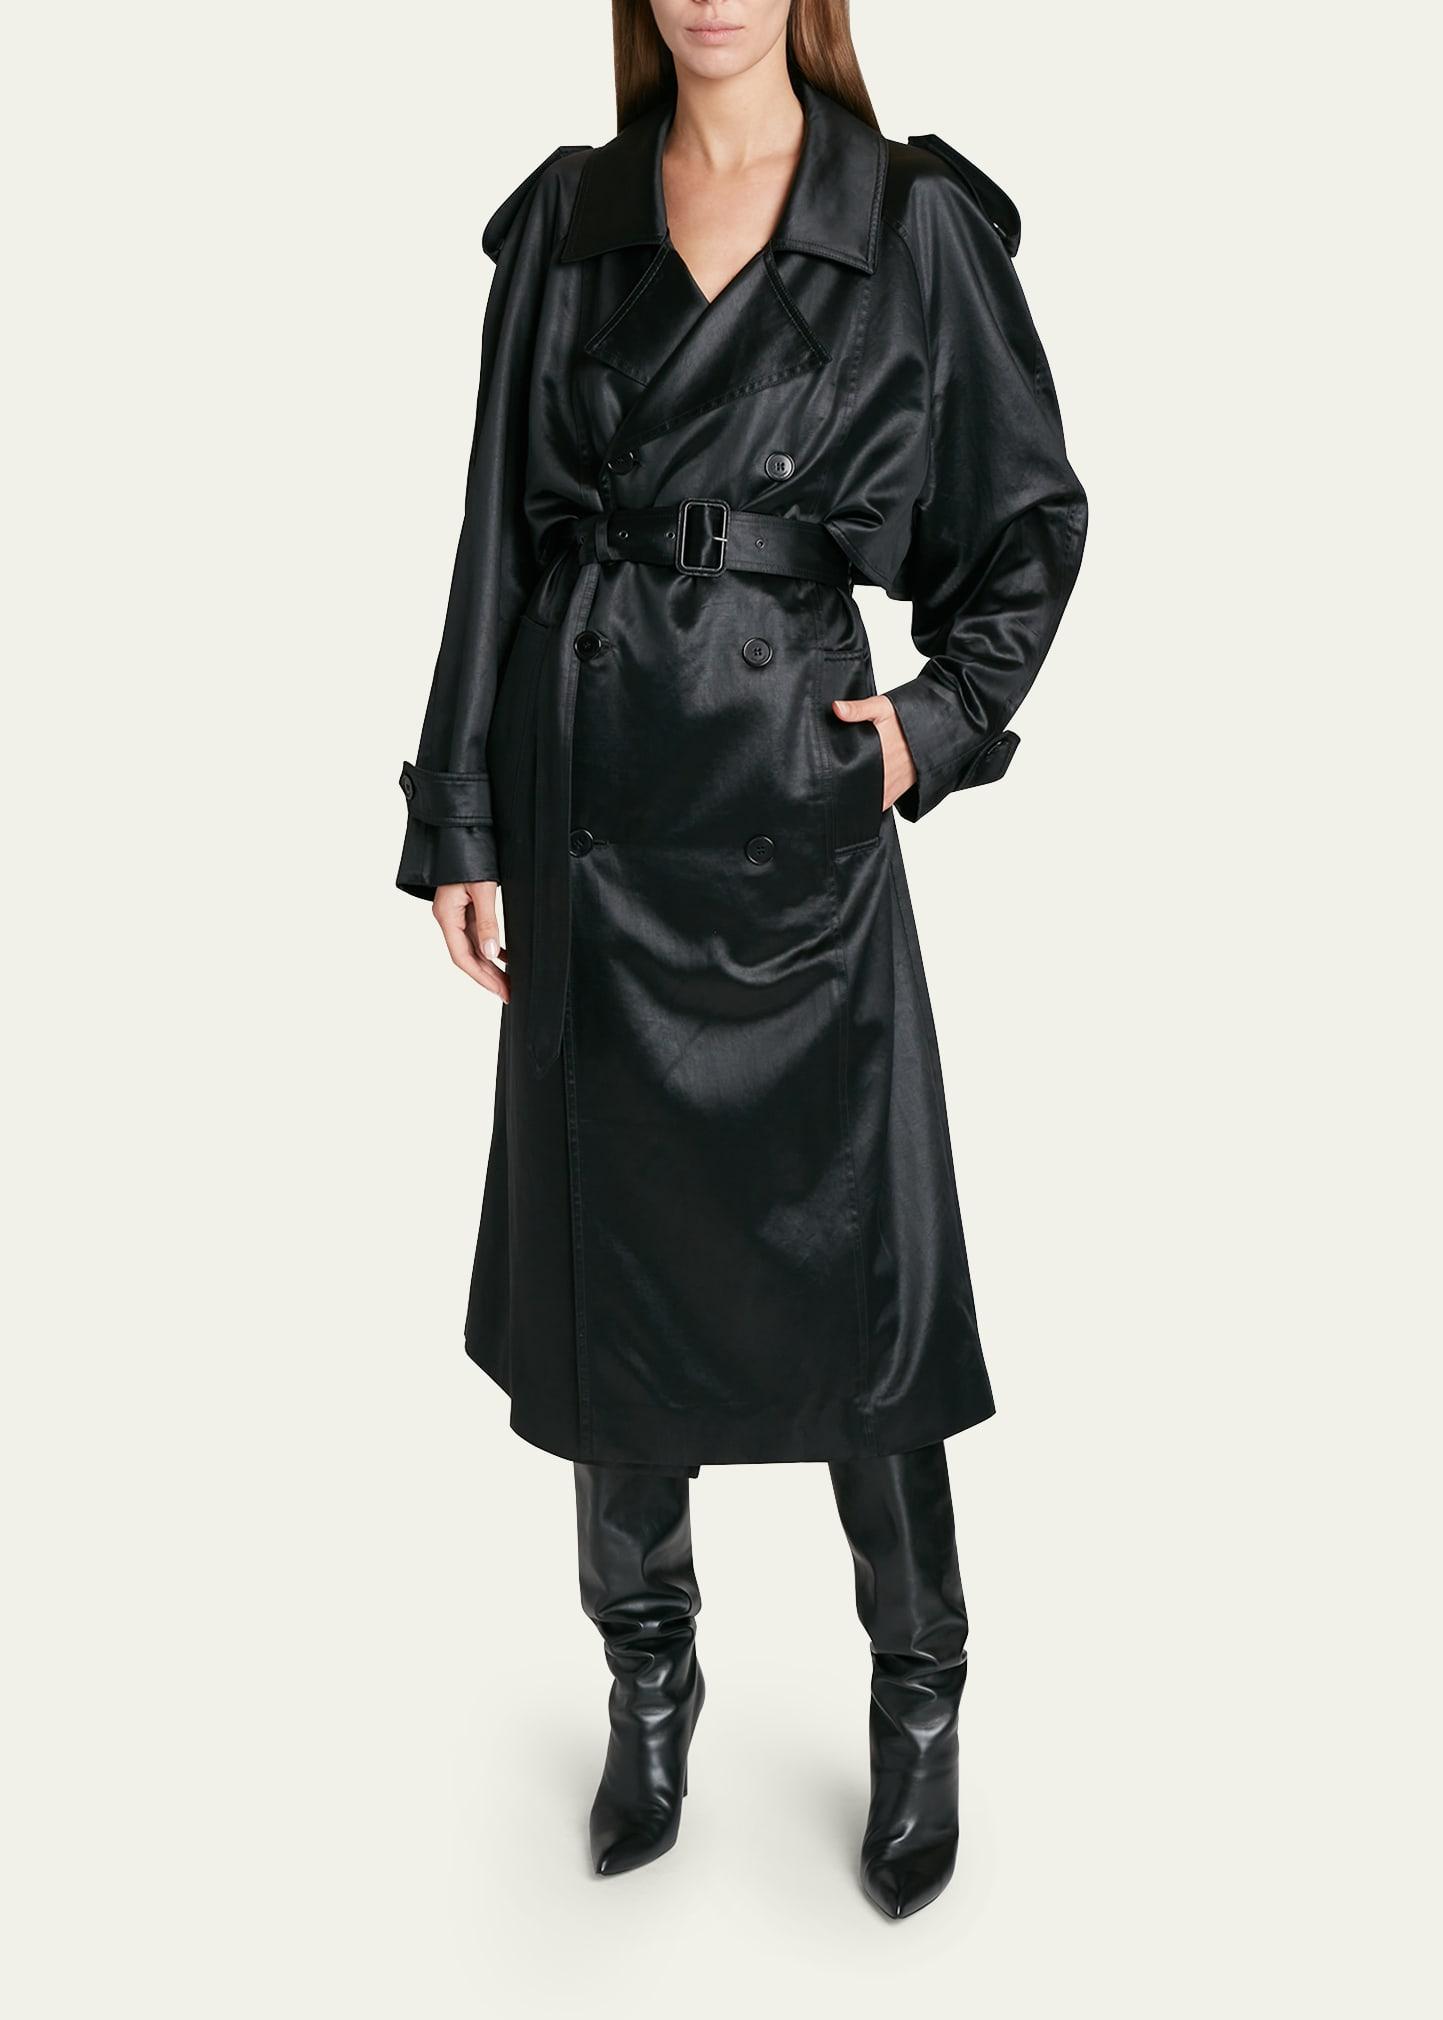 Saint Laurent Satin Double-breasted Belted Trench Coat in Black | Lyst